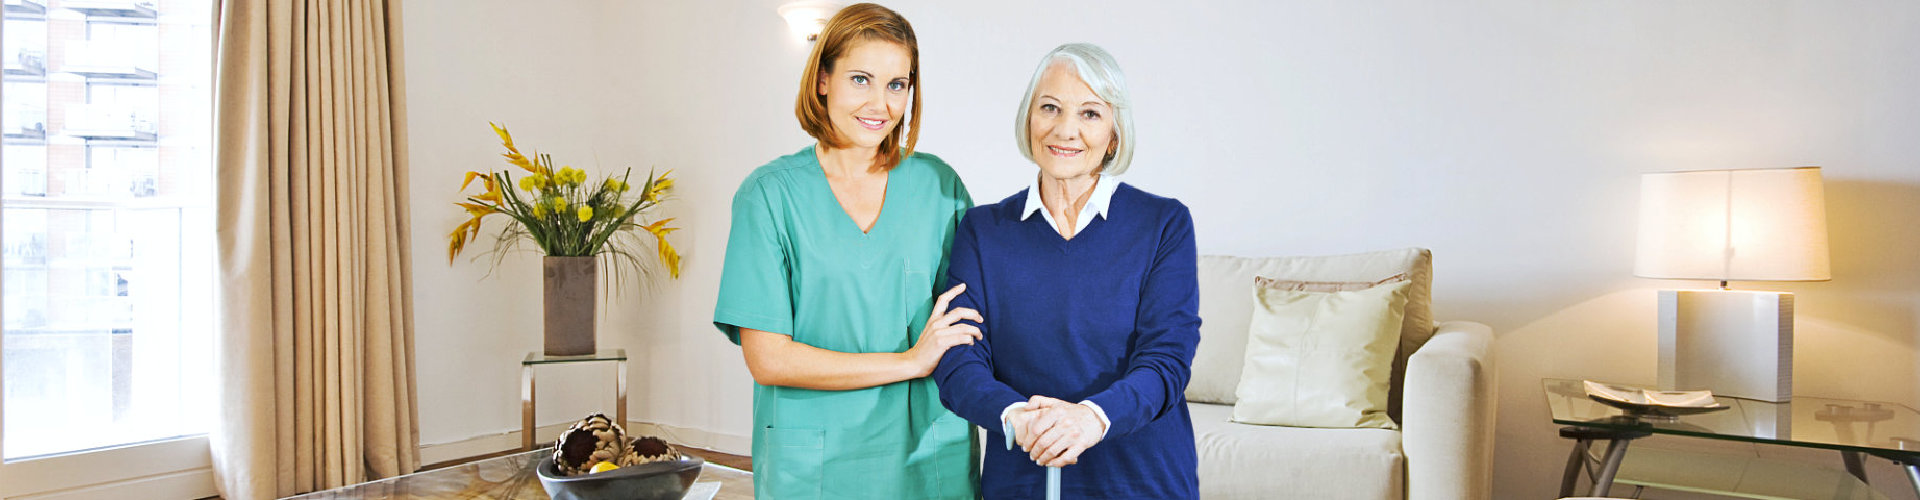 caregiver and senior woman standing